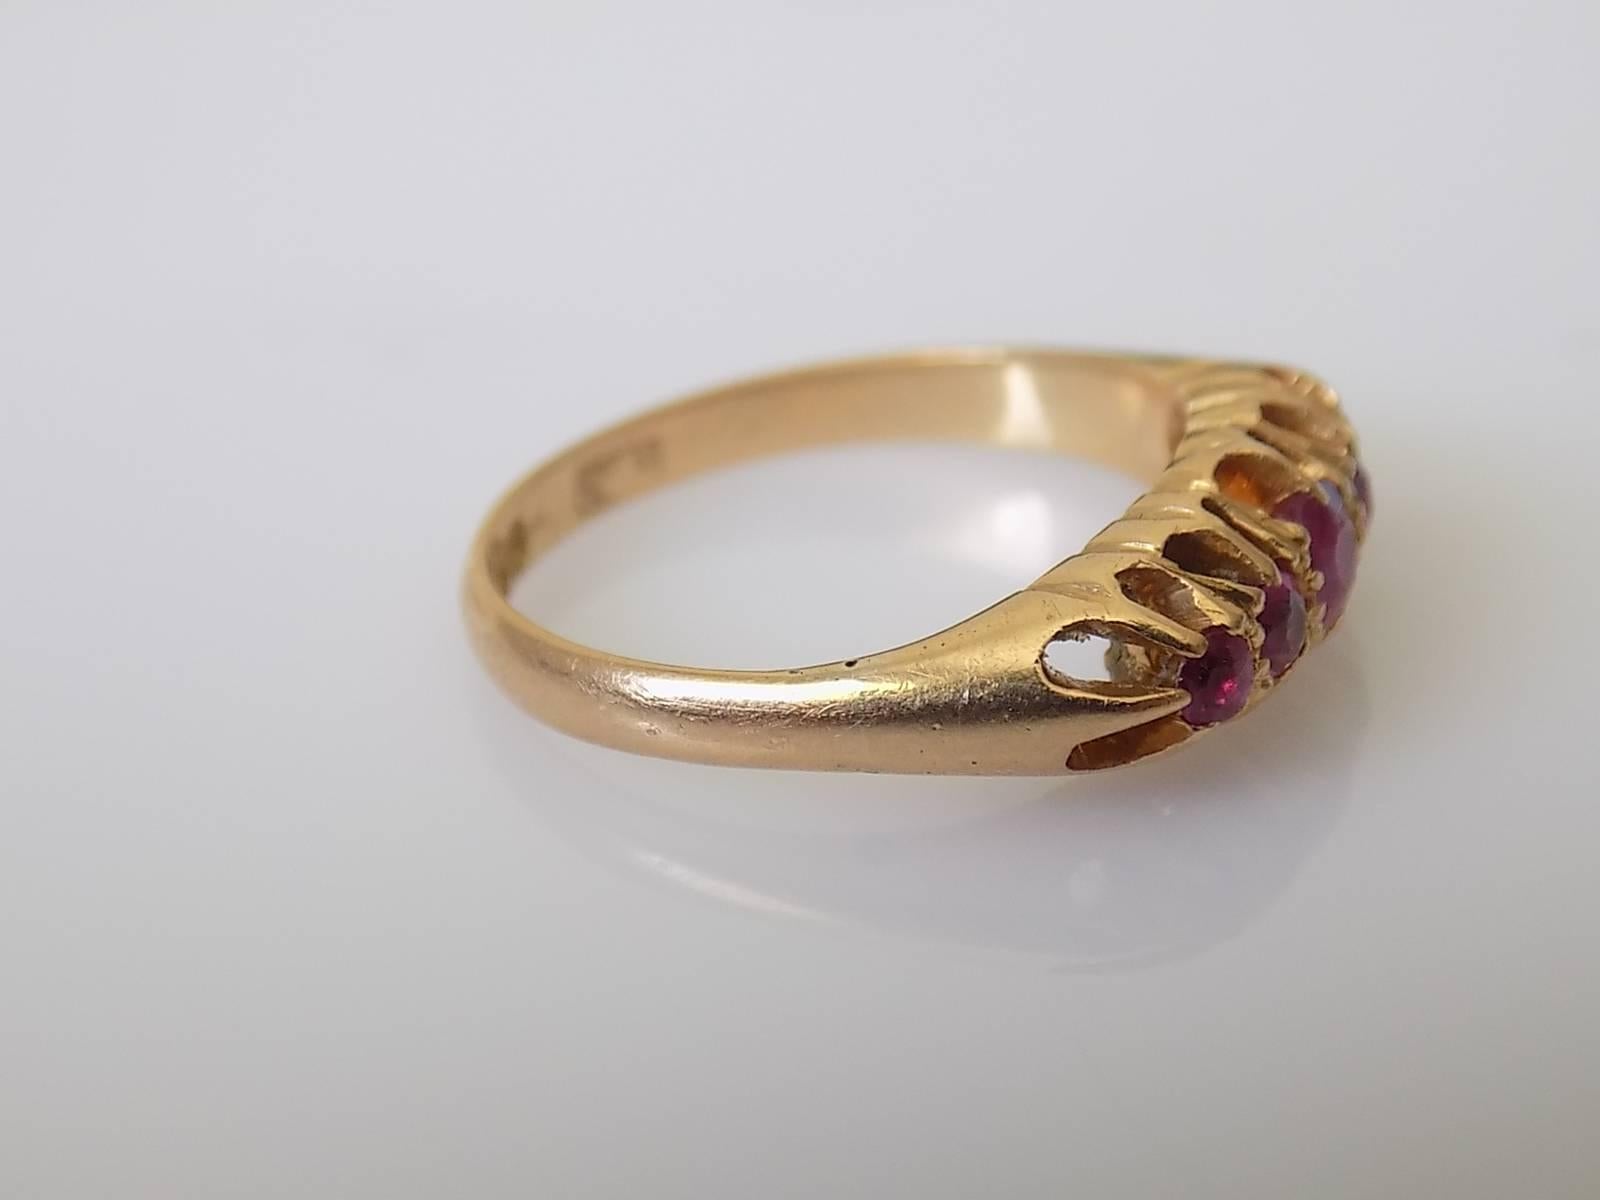 A Lovely Victorian c.1870s 18 Carat Gold and five Ruby ring. English origin.
Size K 1/2 UK, 5.5 US (sizeable).
Height of the face 5mm.
Rubies from 2mm to 3.2mm
Weight 3.1gr.
Full London hallmark for 18 carat gold.
The ring in very good condition.